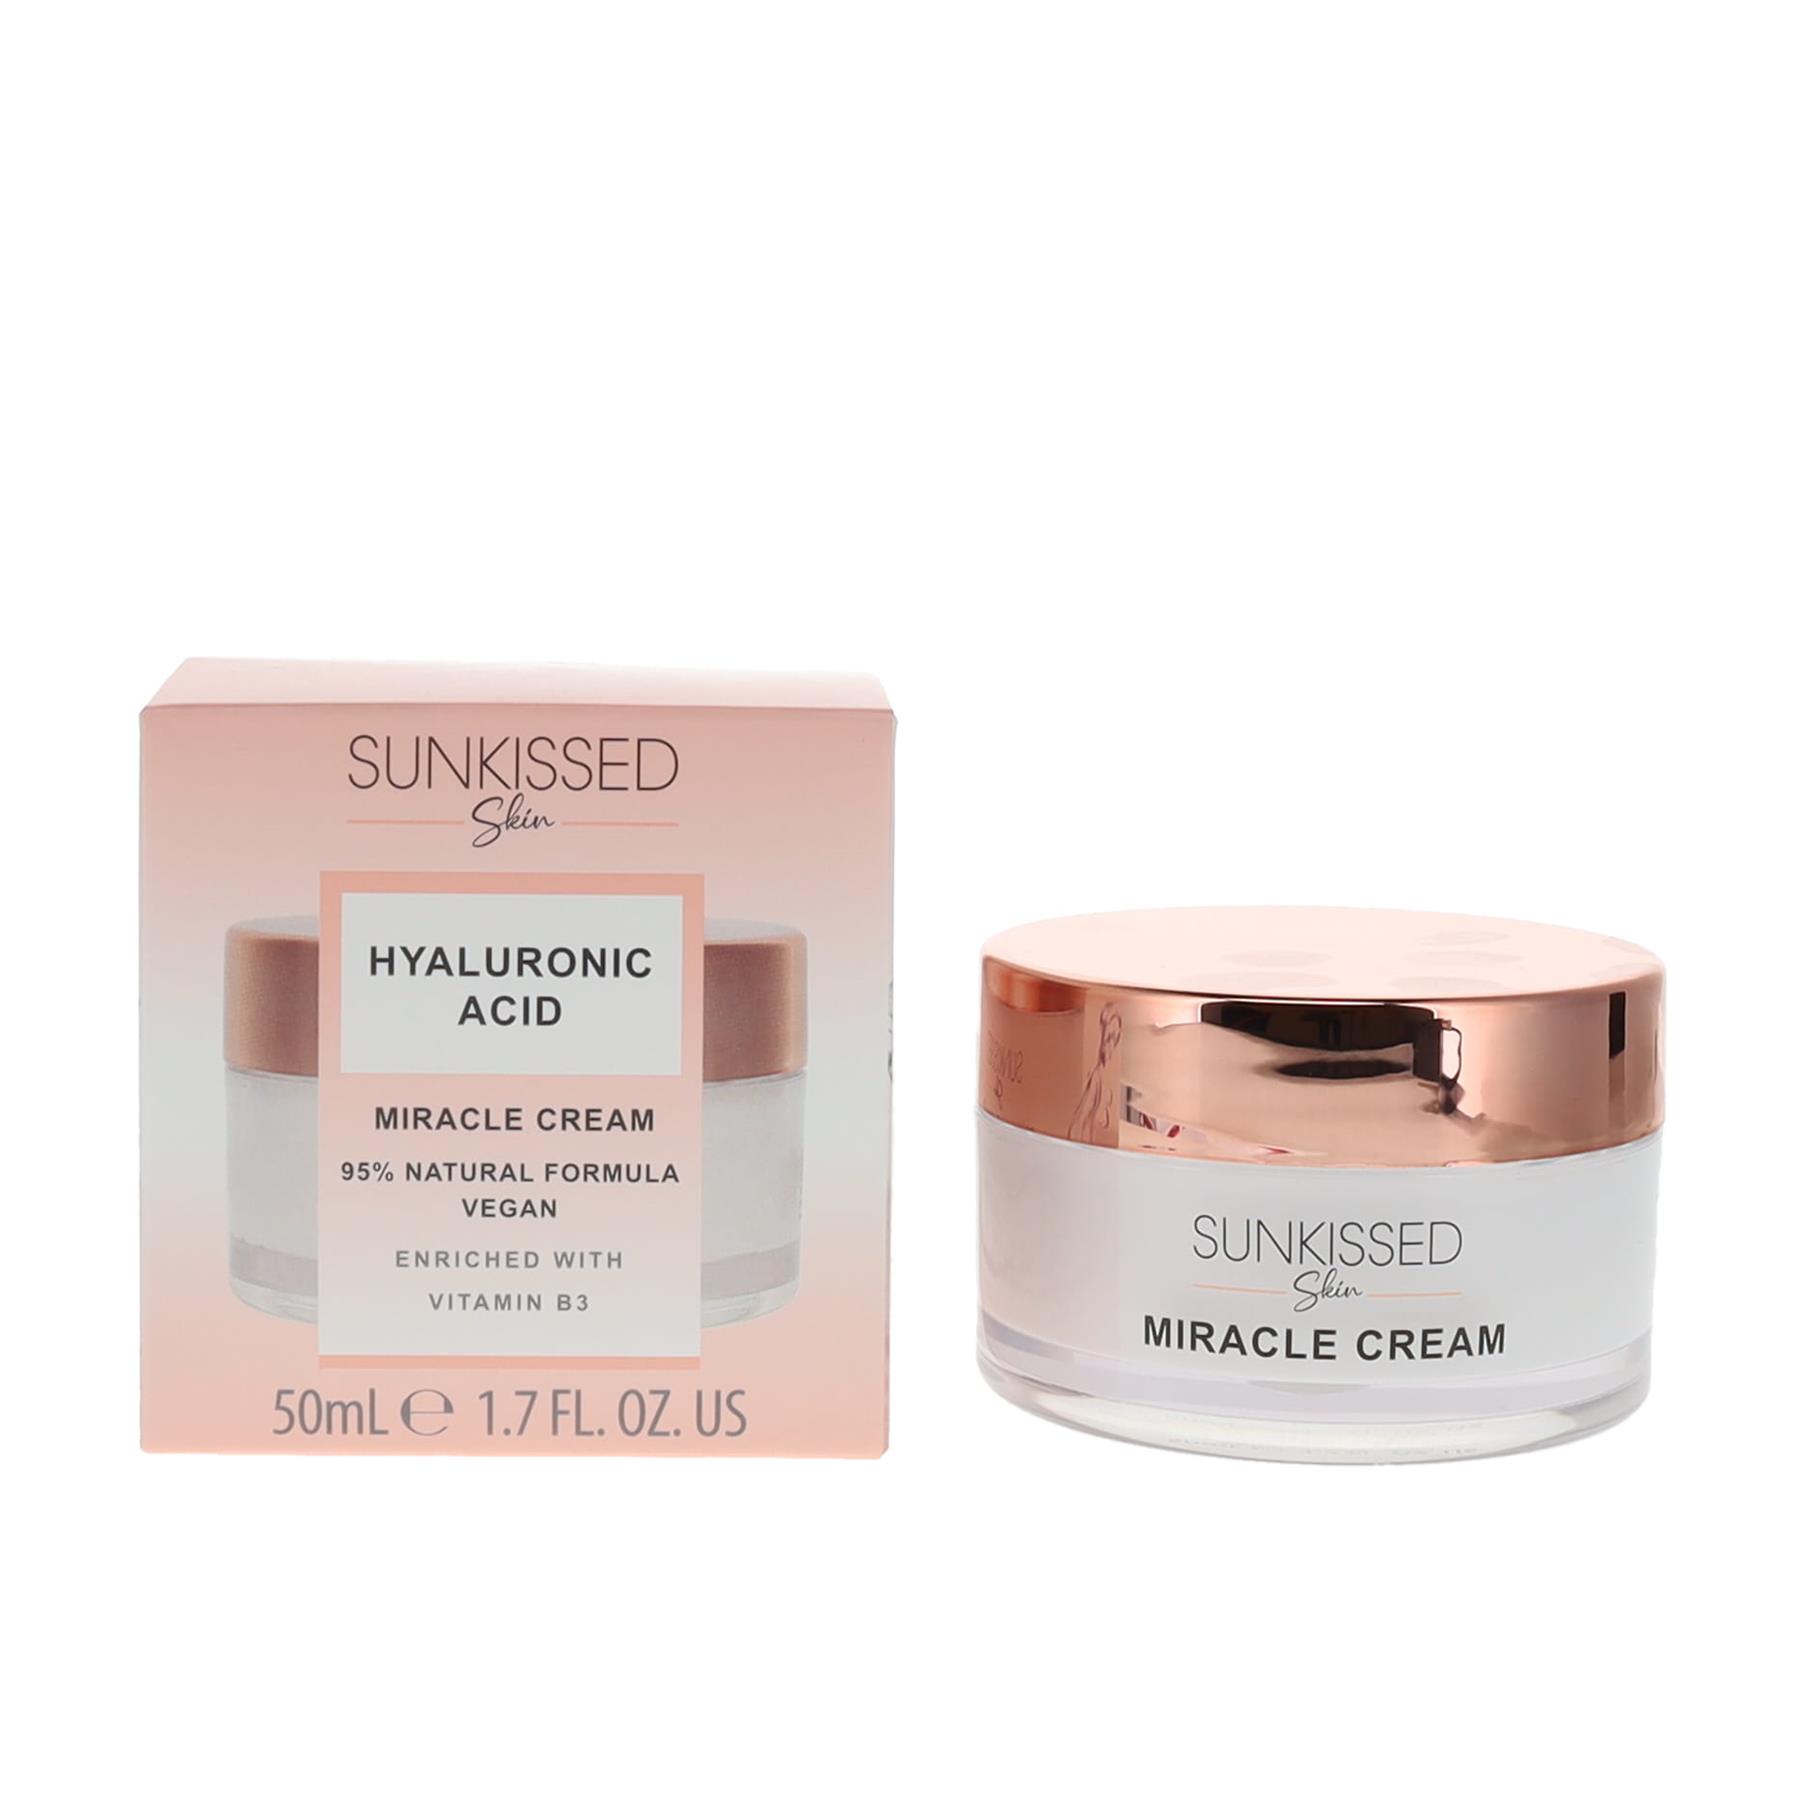 Sunkissed Skin Hyaluronic Acid Miracle Cream 50ml Enriched with Vitamin B3 - 95% Natural Formula -... from Perfume Plus Direct